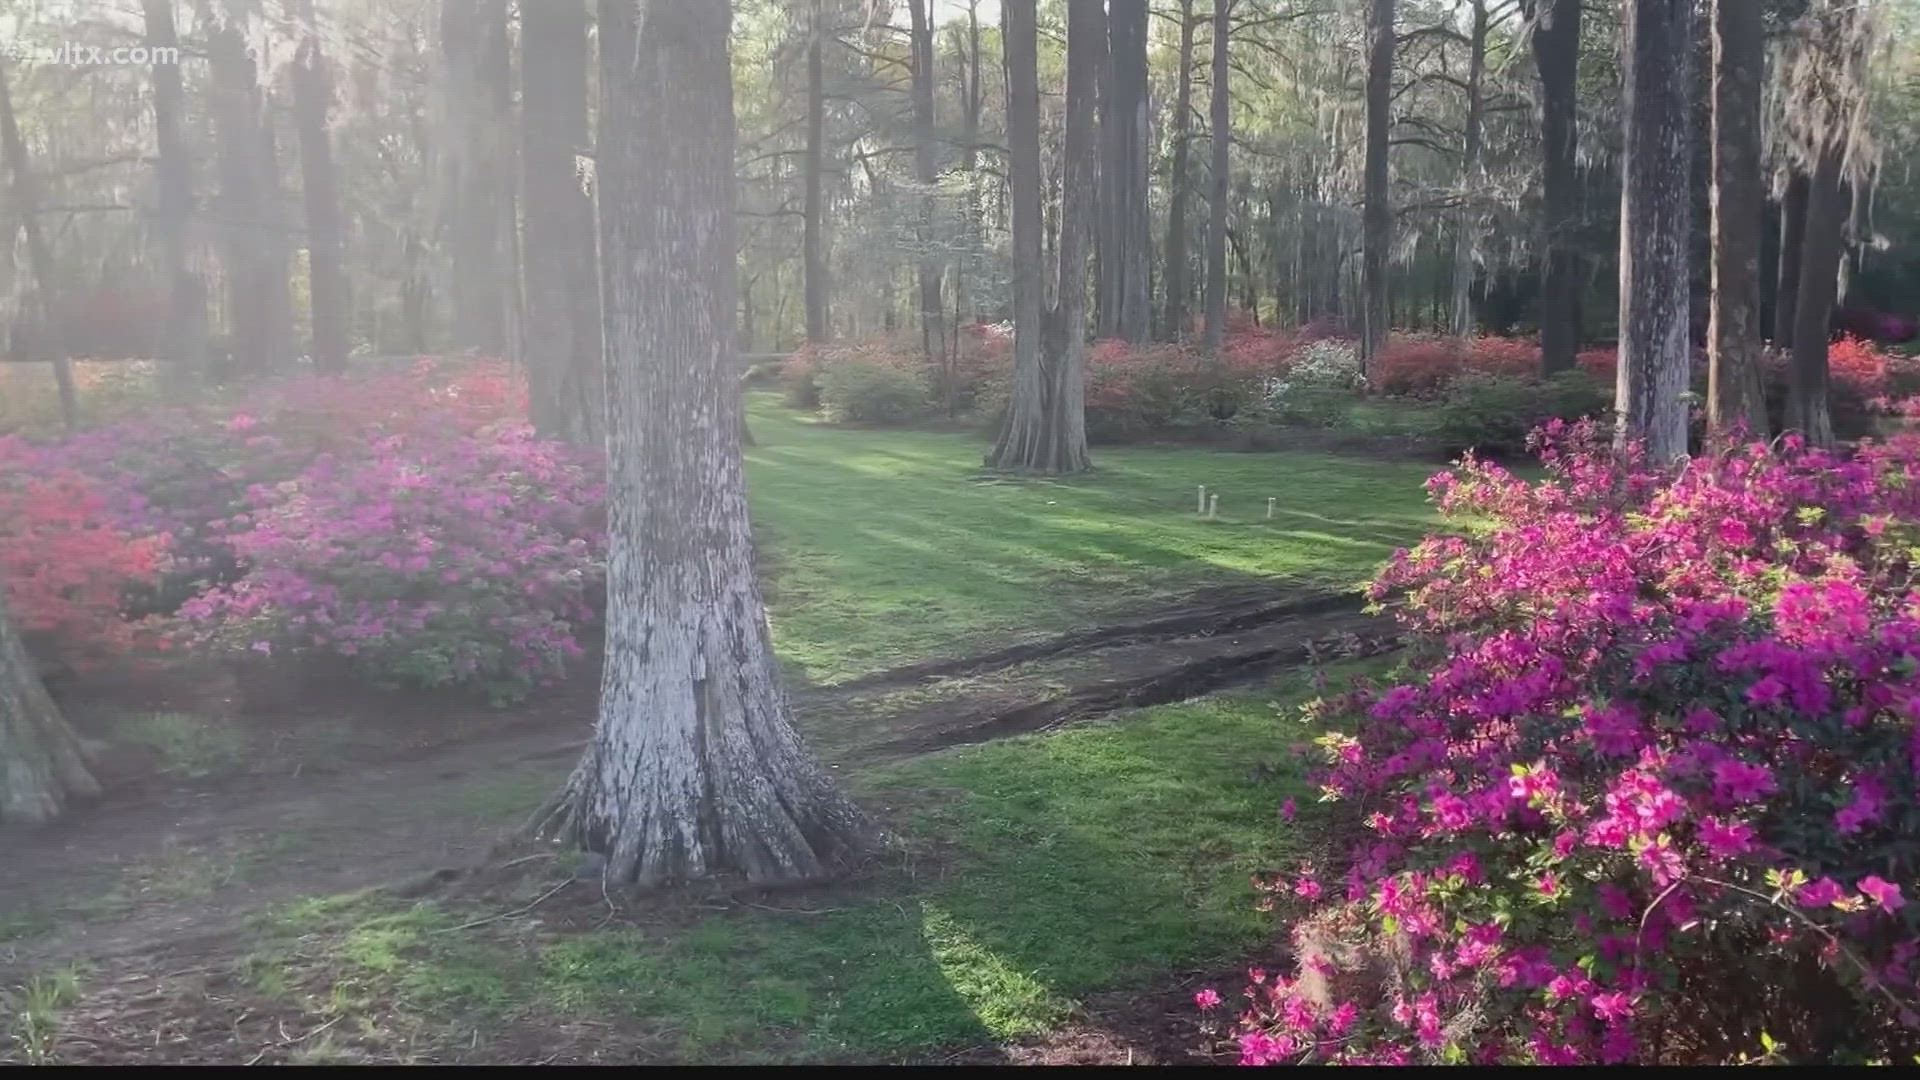 It's the time of year when folks come from far and wide to see the Azaleas and Cherry Blossoms at the Orangeburg park.